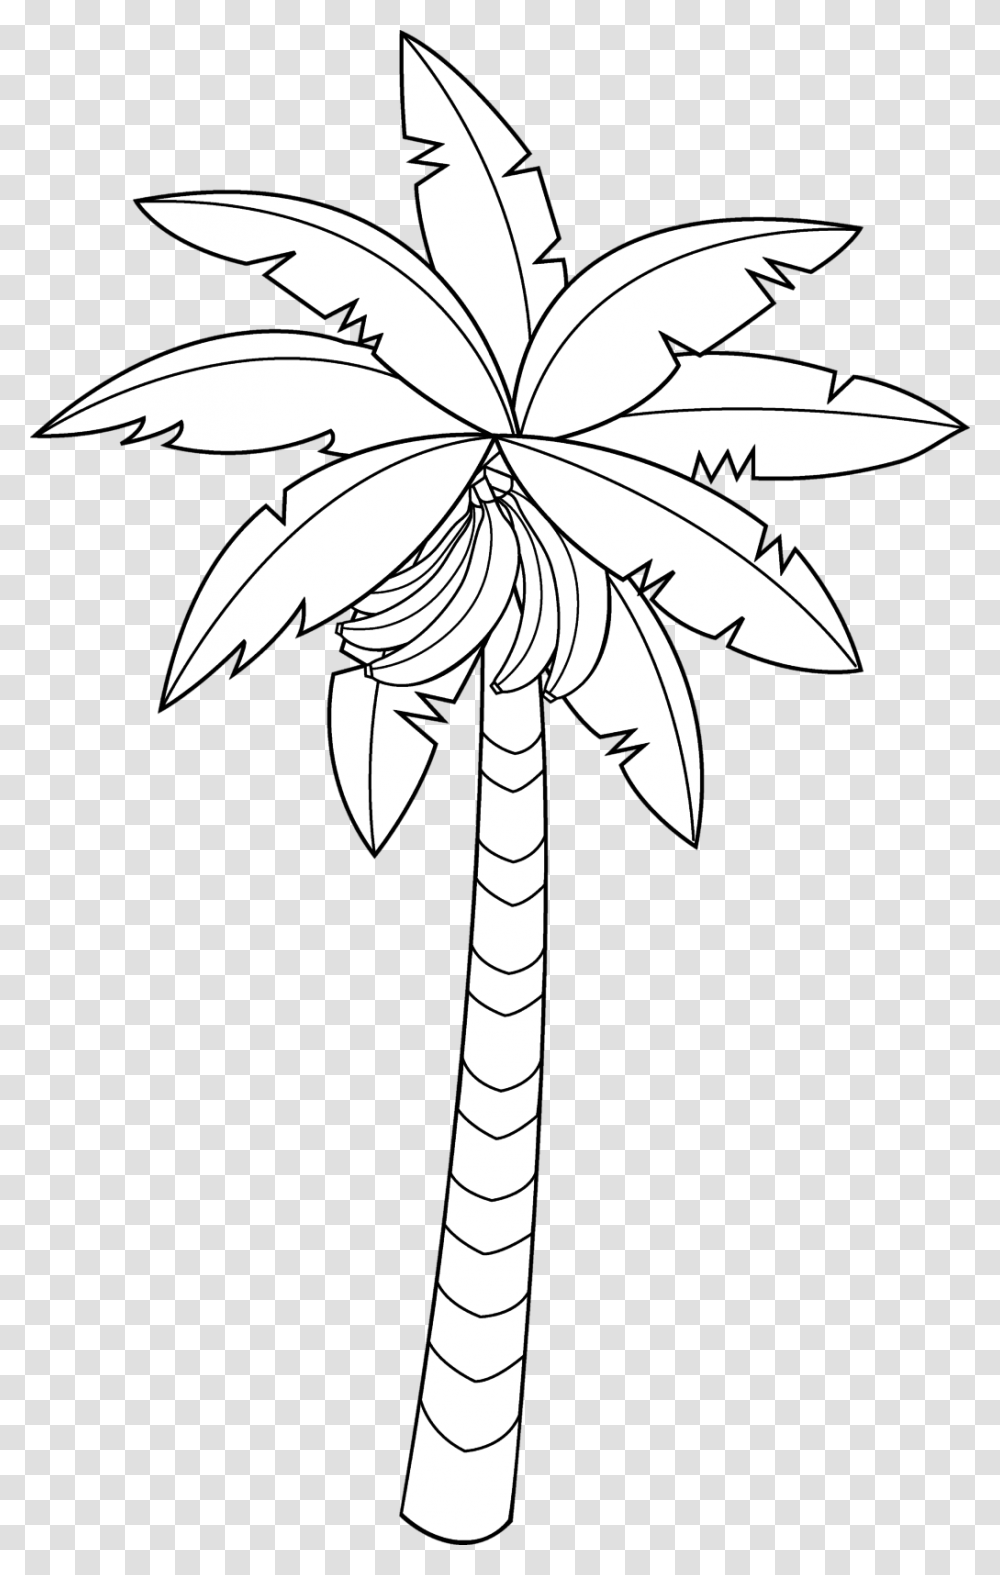 Library Of Banana Tree Svg Library Black And Banana Tree Drawing Easy, Stencil, Cross Transparent Png